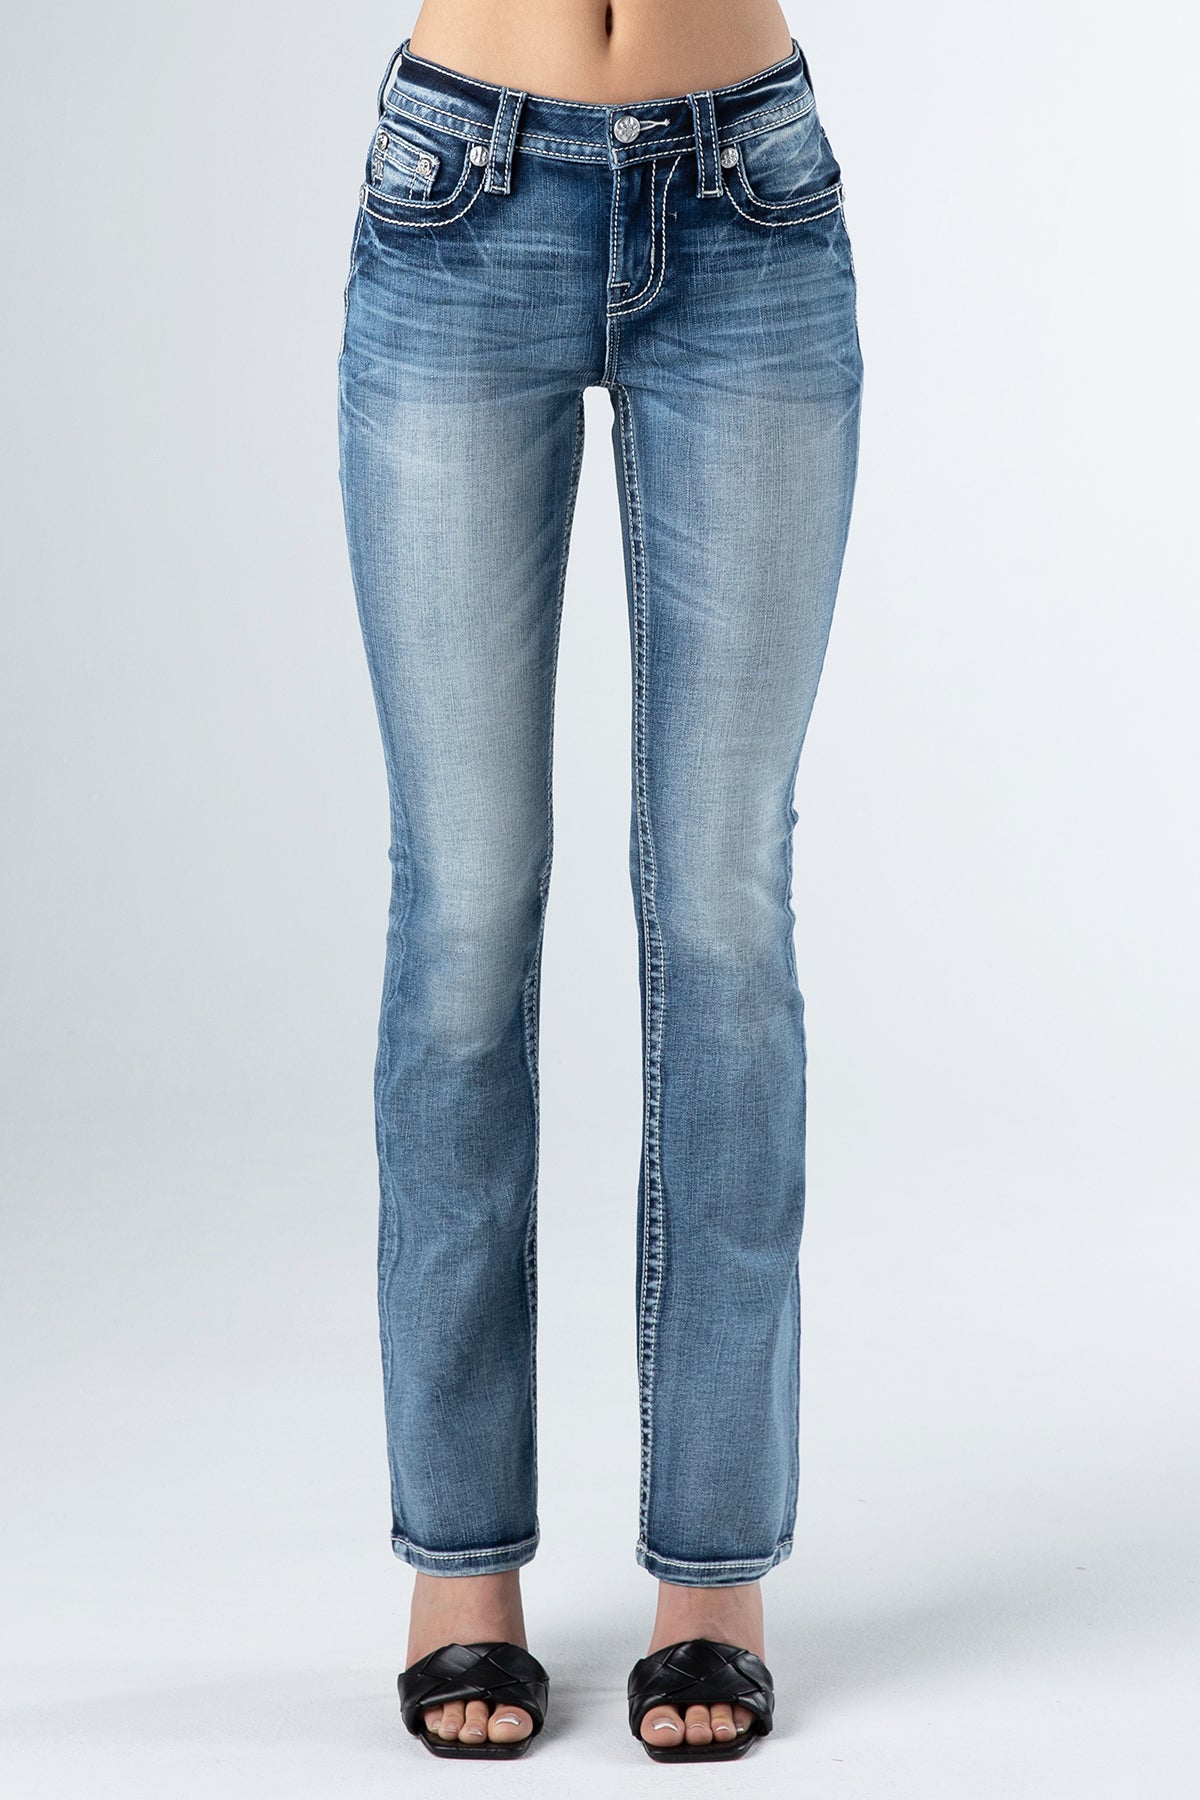 Longhorn Feather Jeans